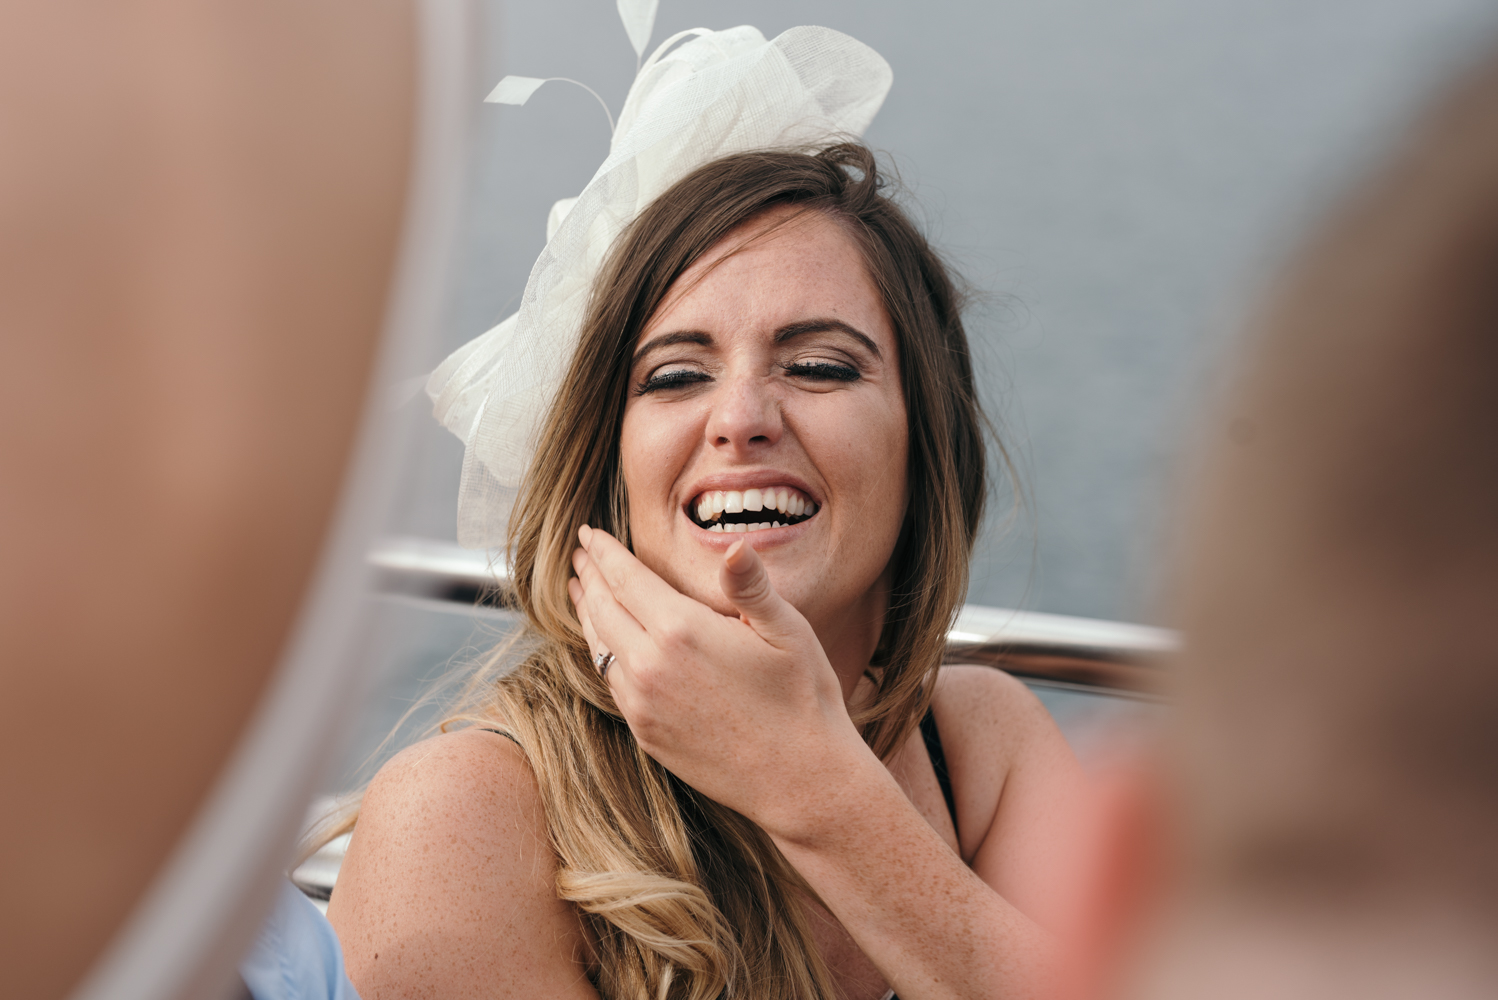 One of the wedding guests goofing around during the lake cruise